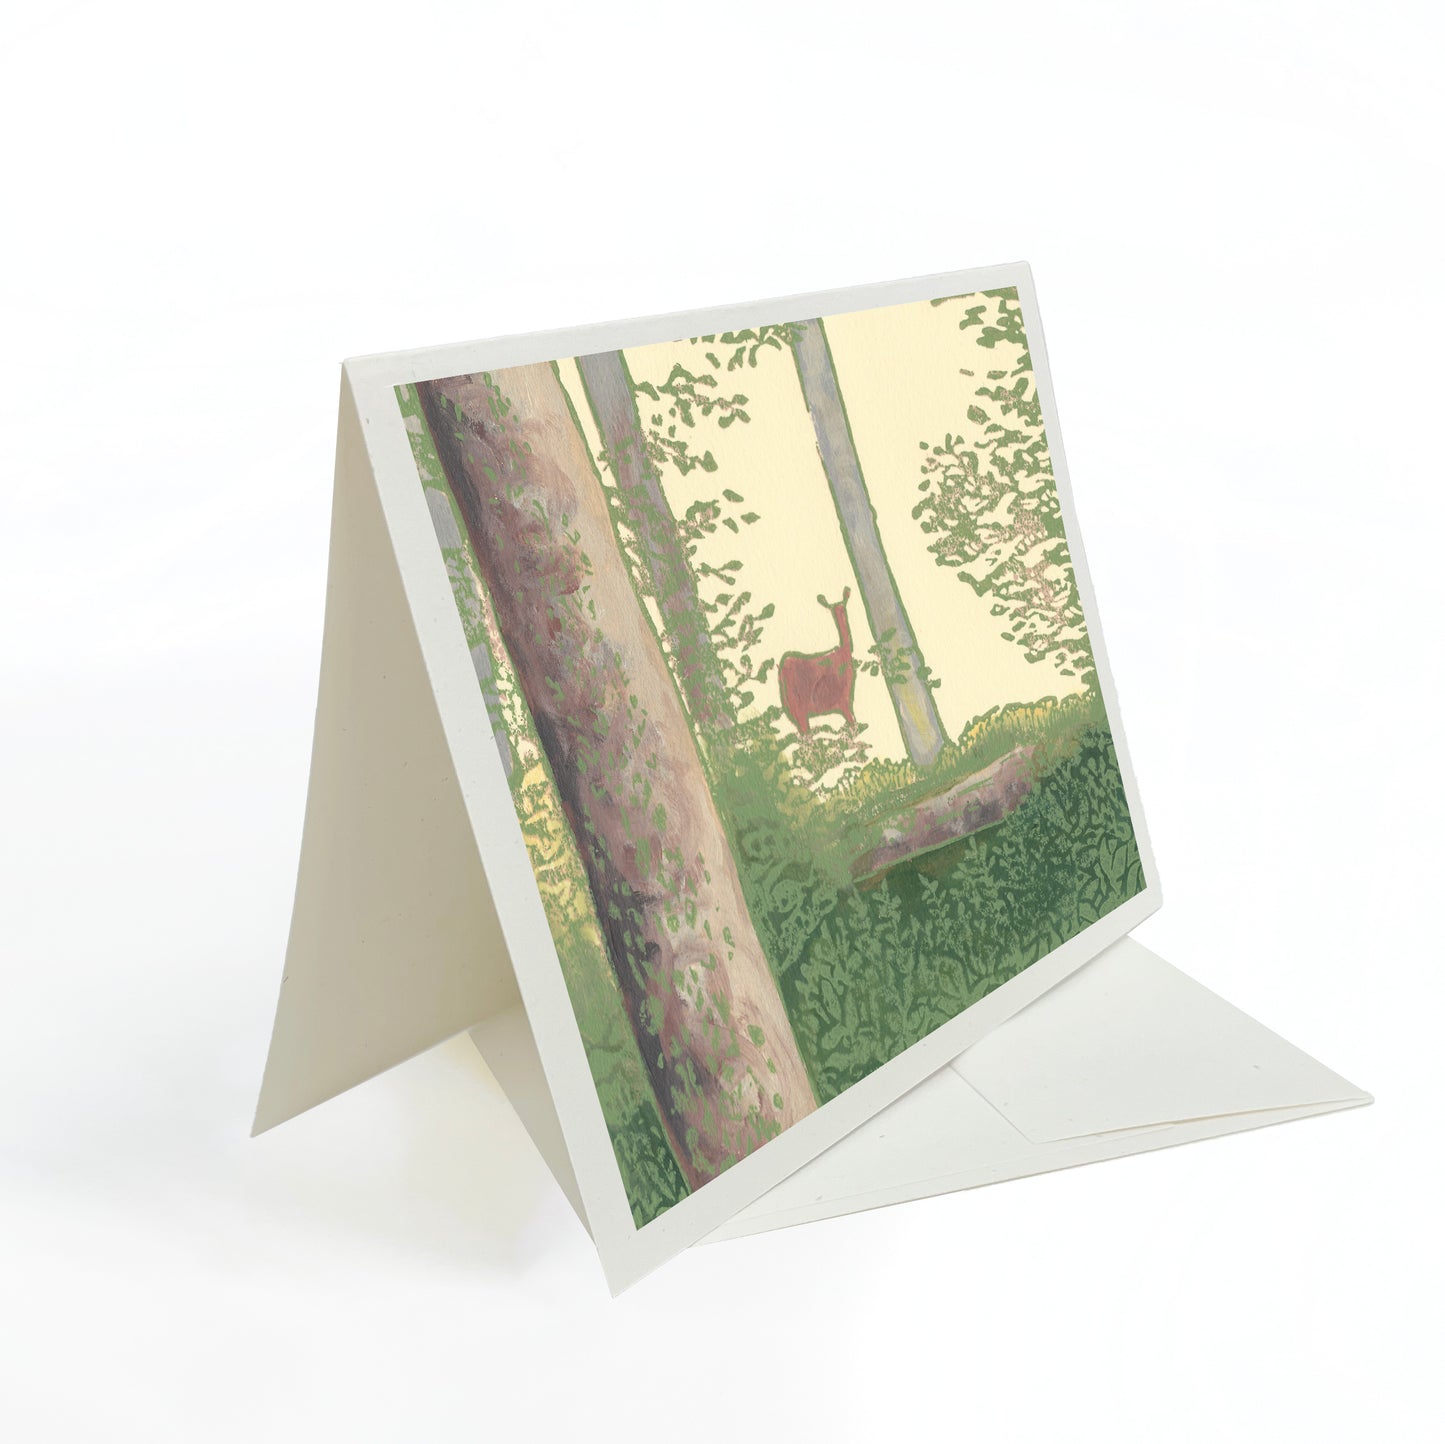 A casually elegant card featuring Michigan wildlife art by Natalia Wohletz titled Deer in the Woods.